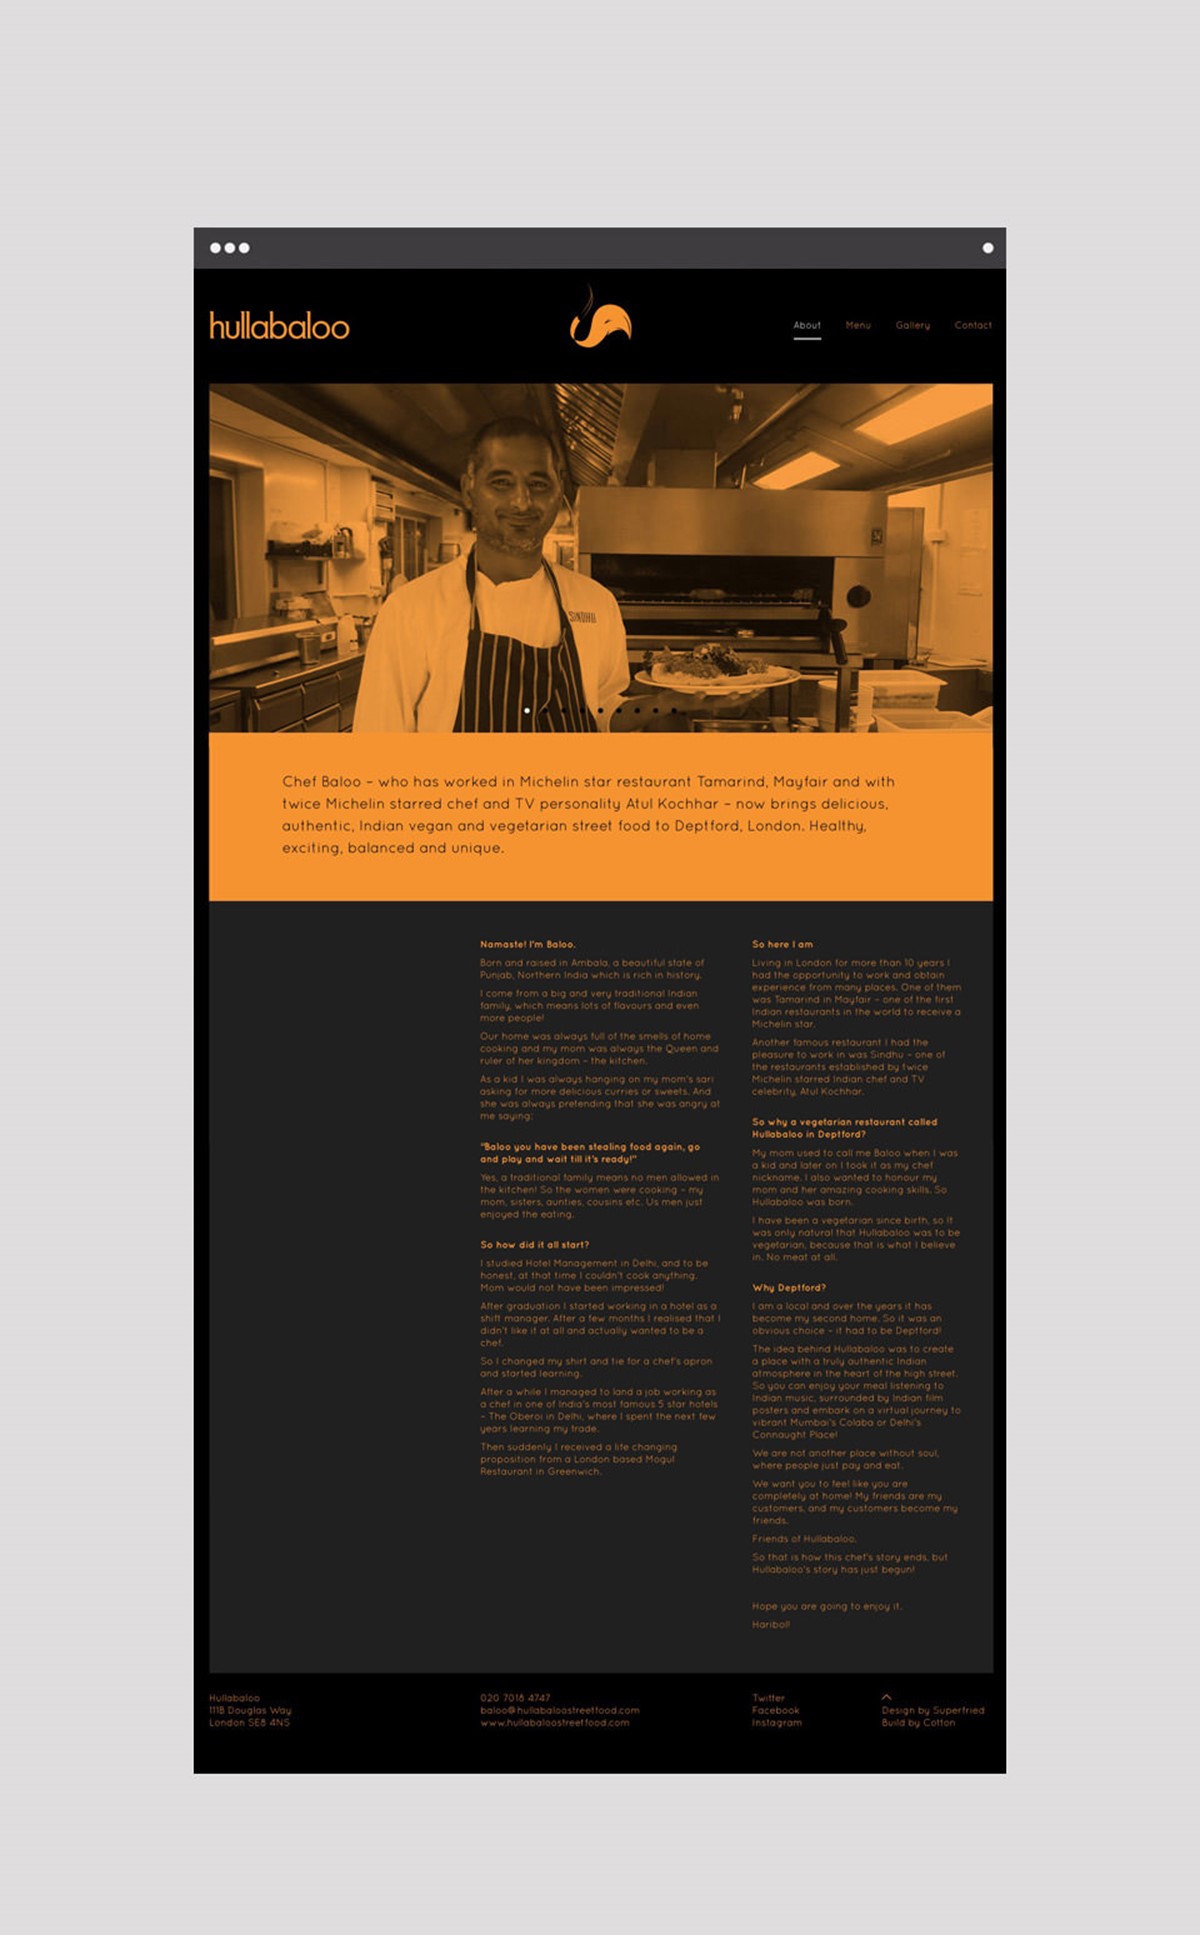 Hullabaloo. About page. Website design by Superfried. Developed by Cotton.